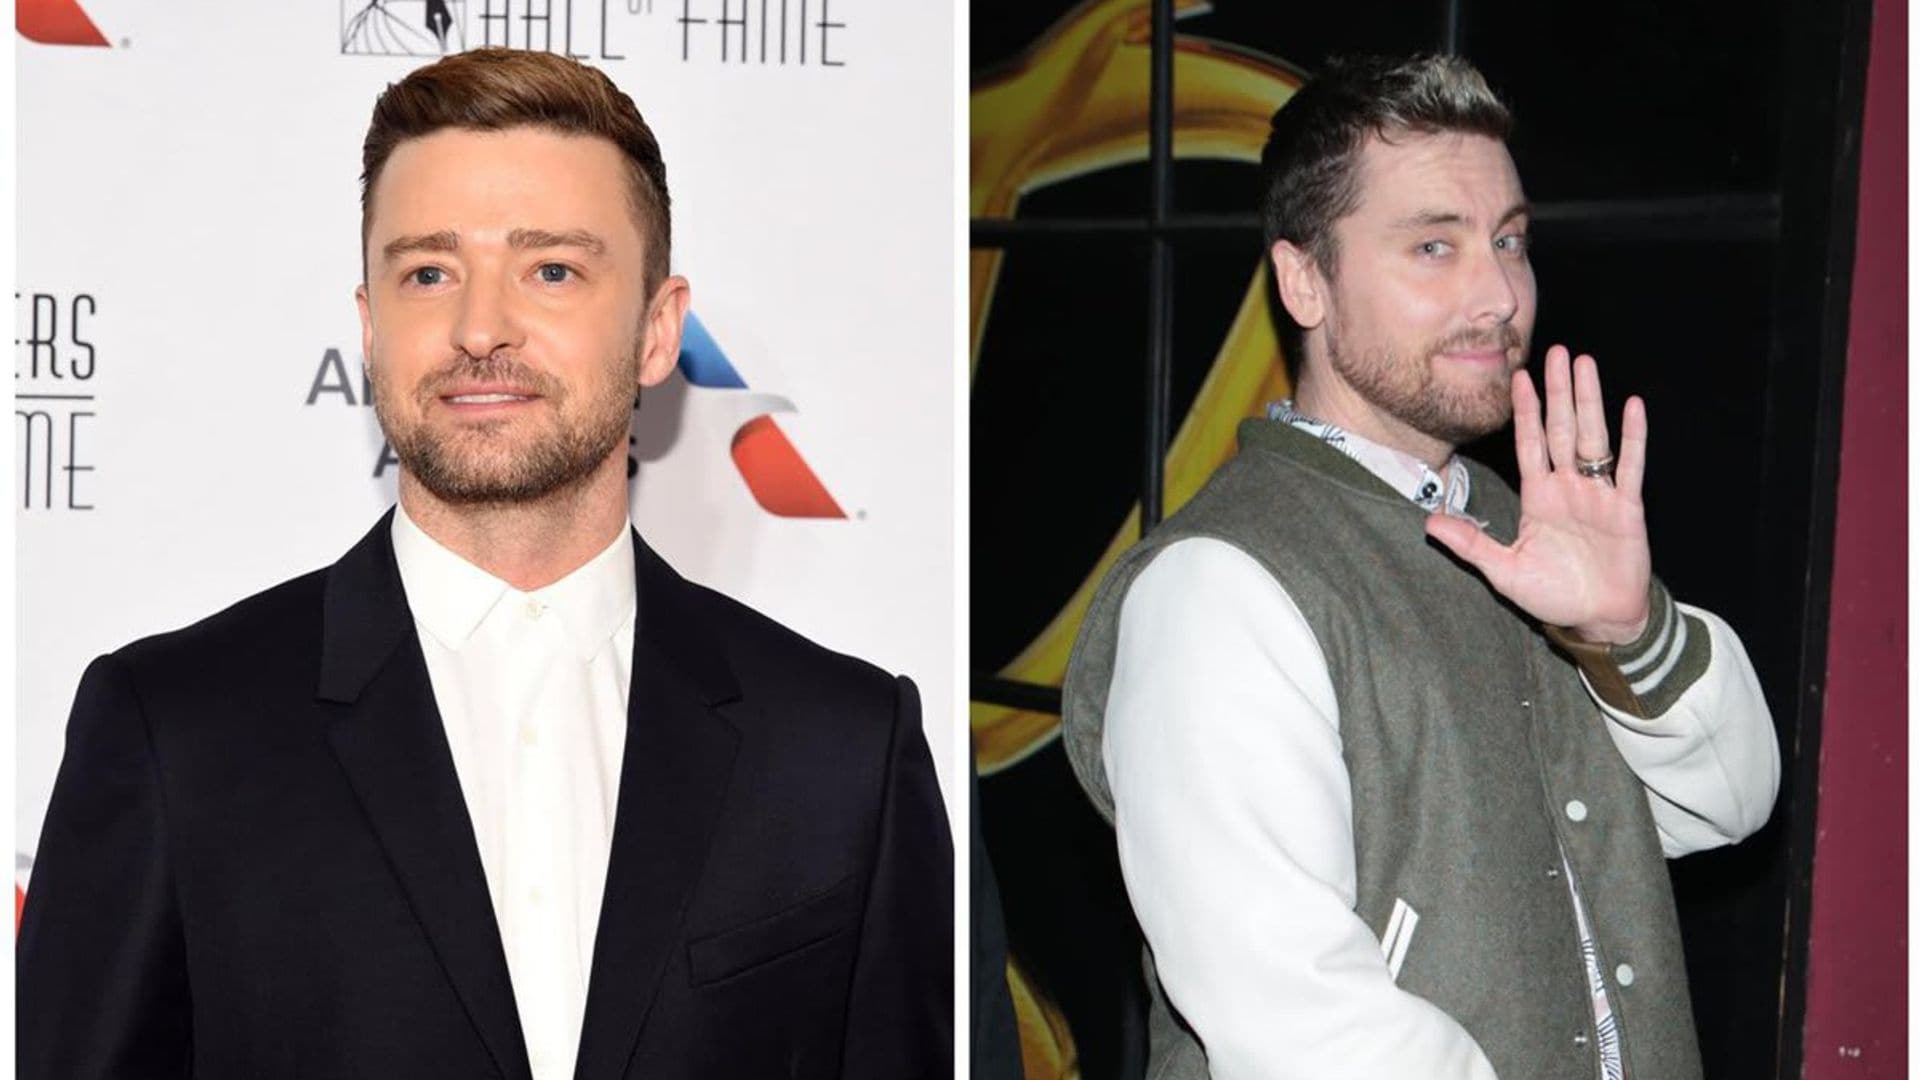 Lance Bass called out Justin Timberlake for being too busy to respond to his text